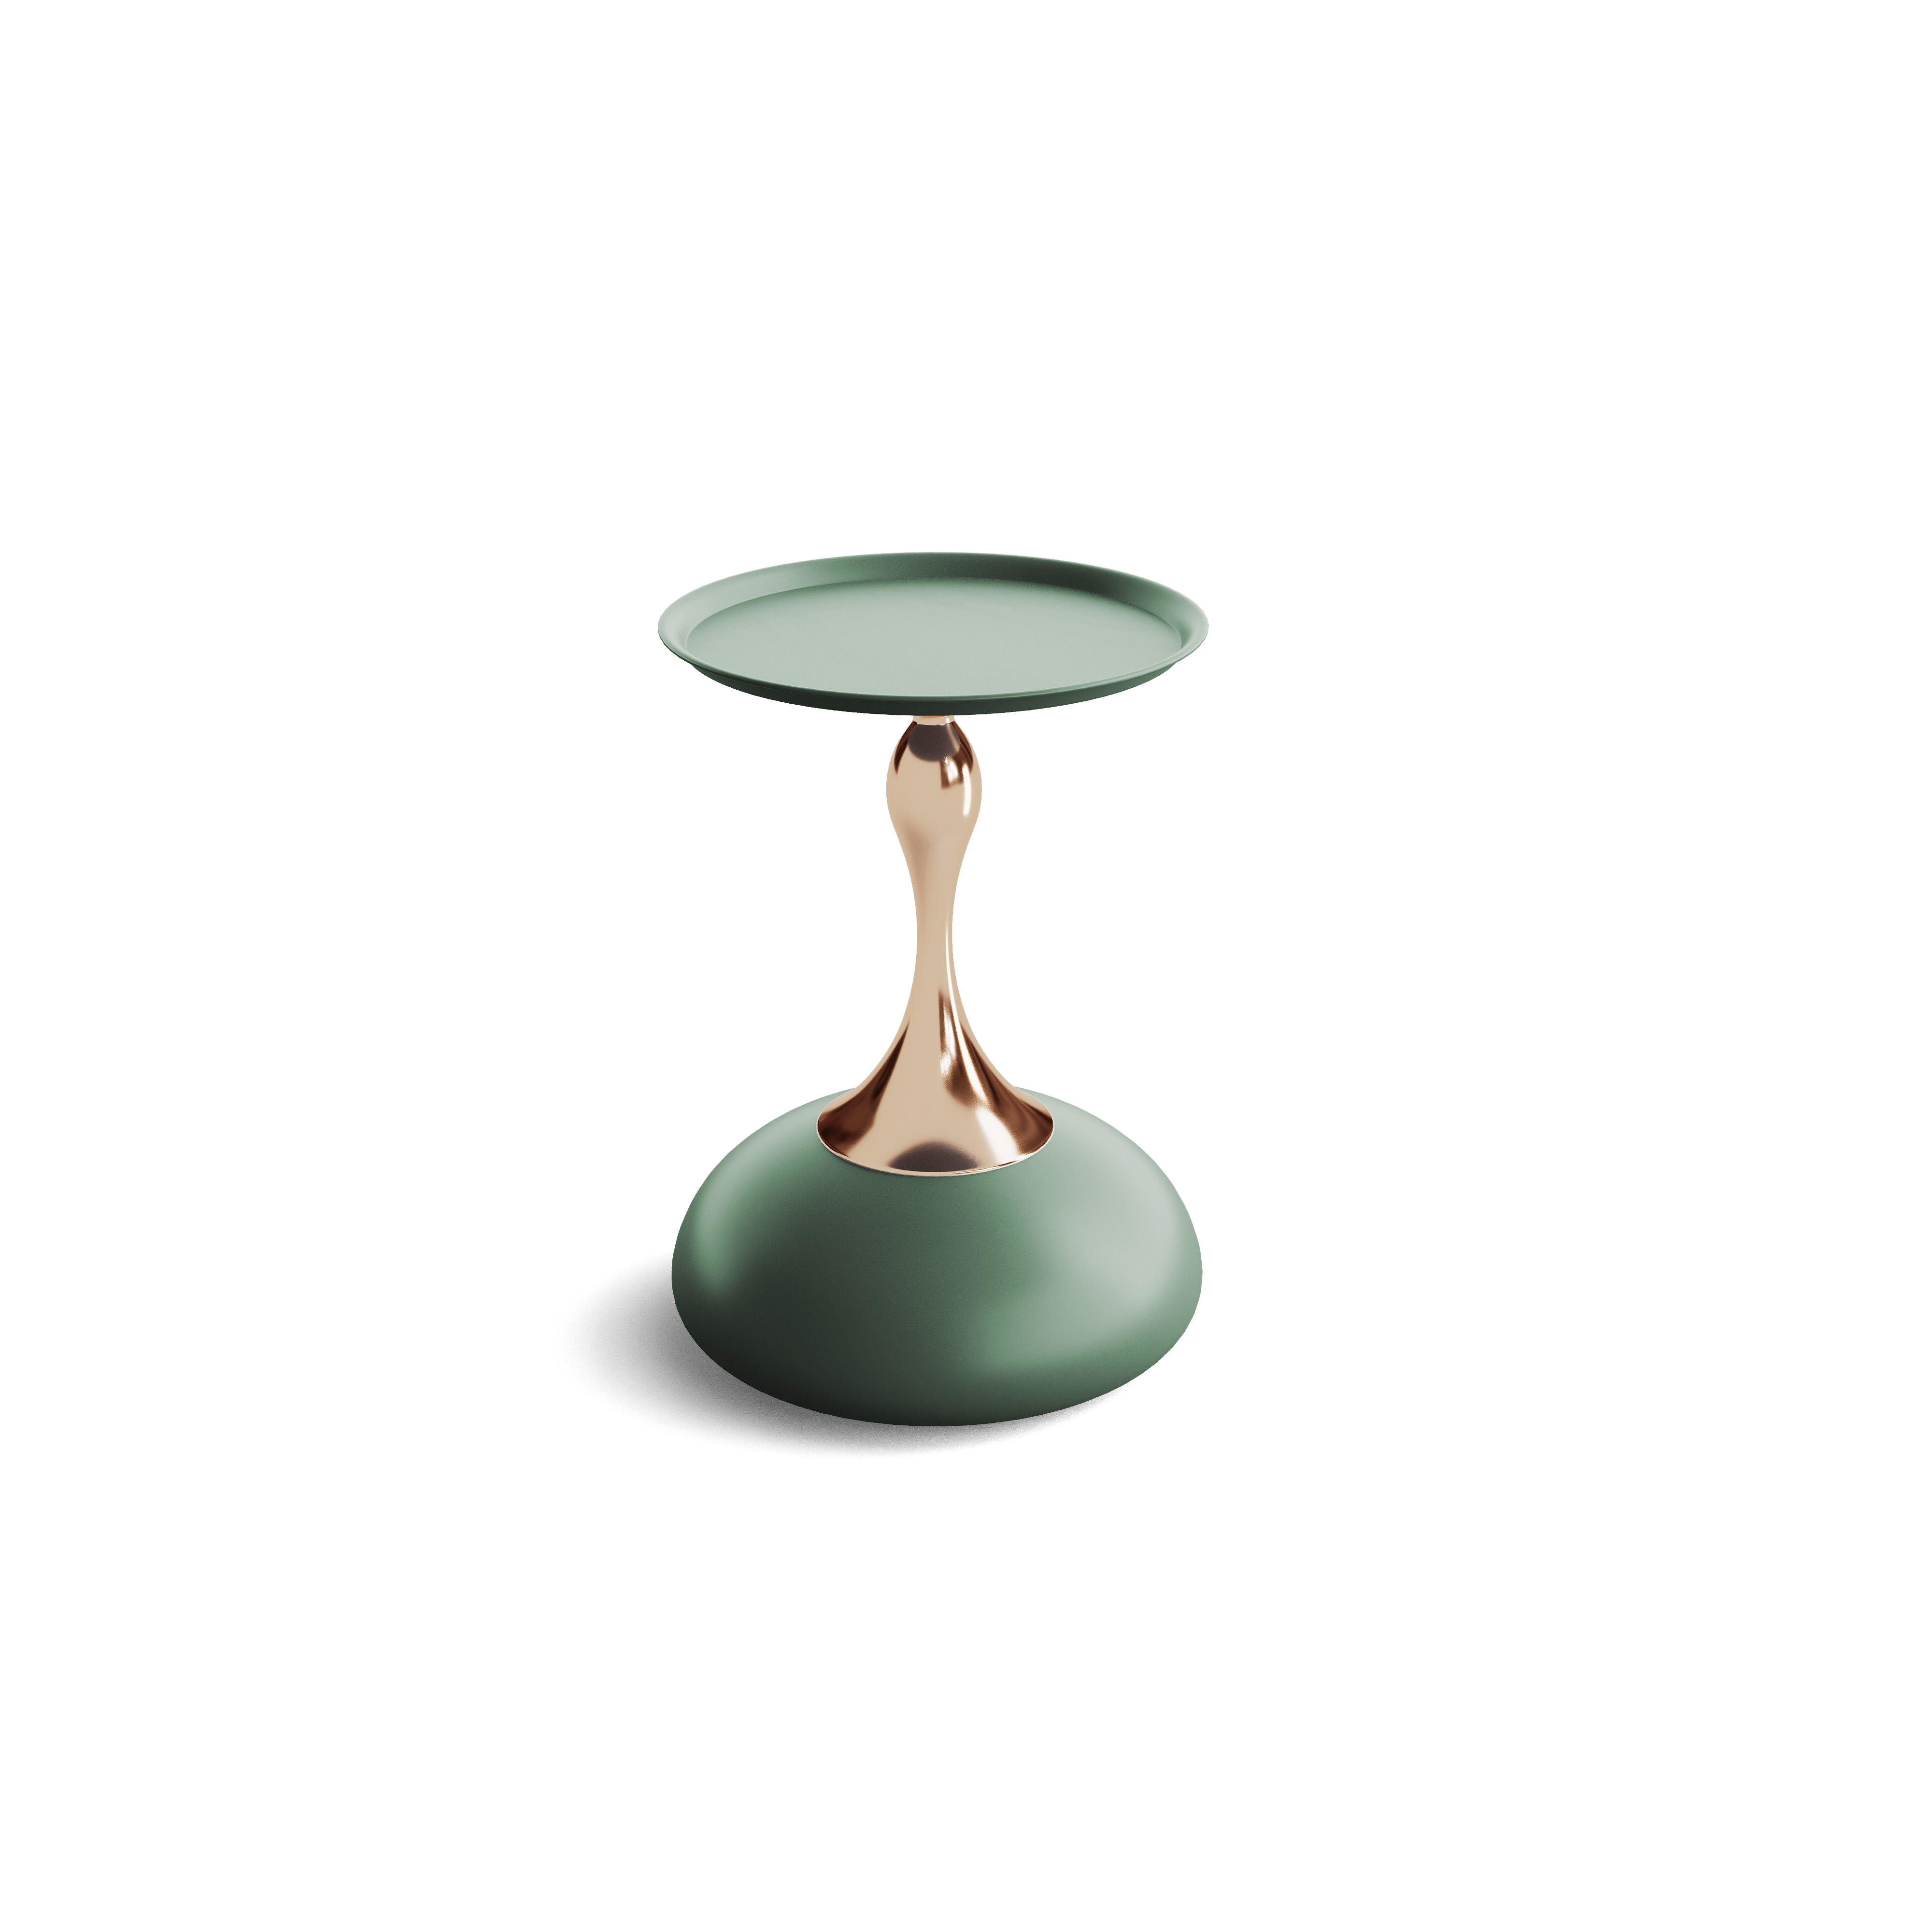 Luxury Design Iron End Table, Minimalist Round Side Table For Small Space - Green